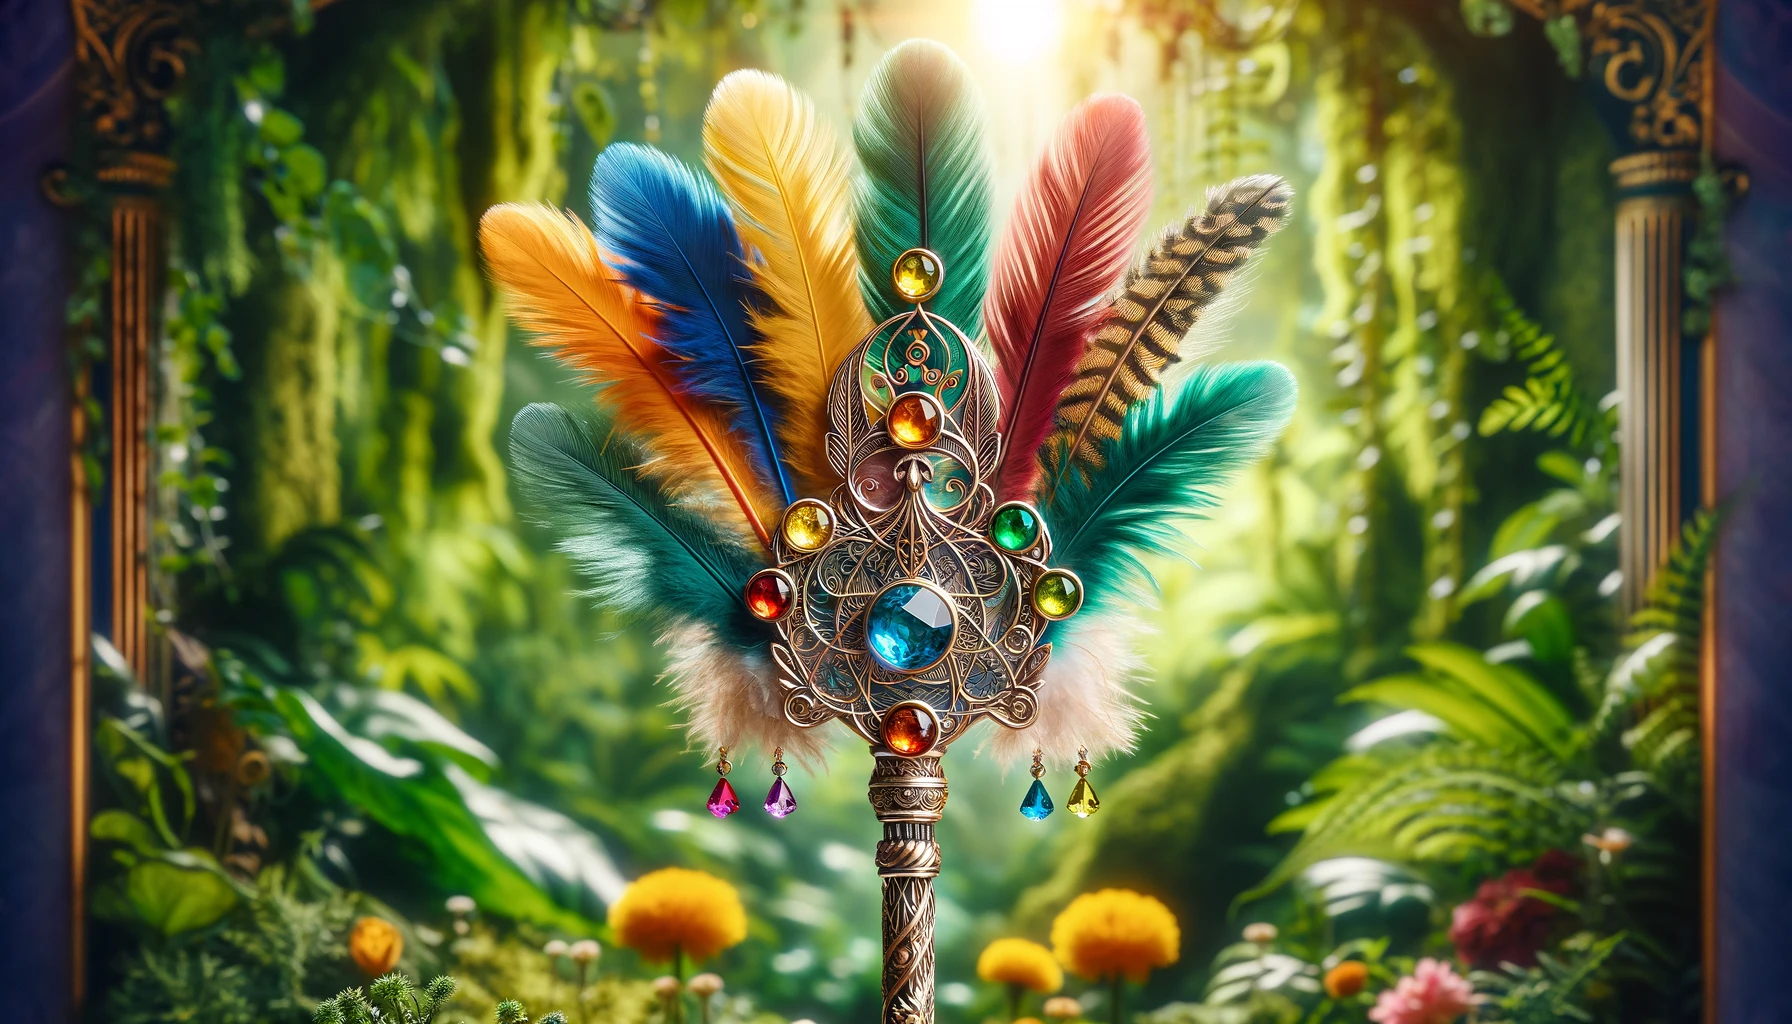 a 169 image featuring an intricately designed wand that embodies the energy and potential of the Ace of Wands tarot card The wand should be adorned with vibrant feathers in a va